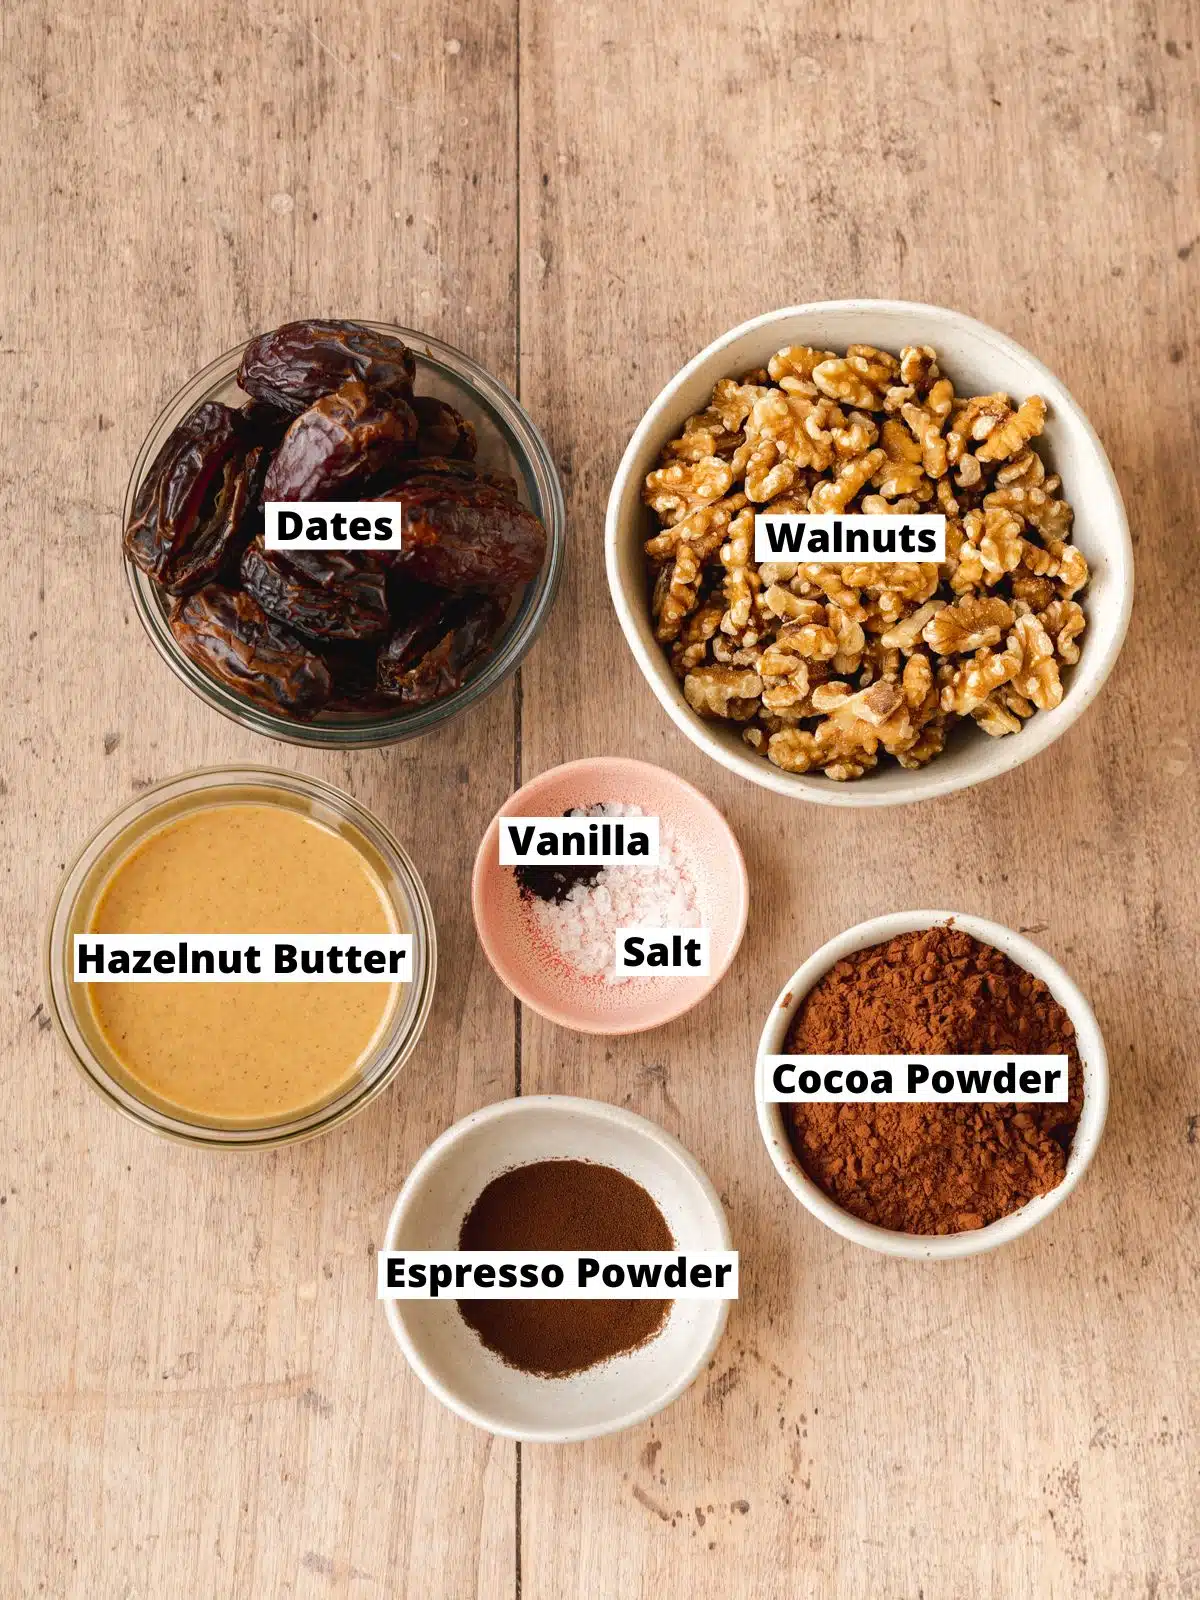 ingredients for no bake brownies measured out in bowls on a wooden surface.